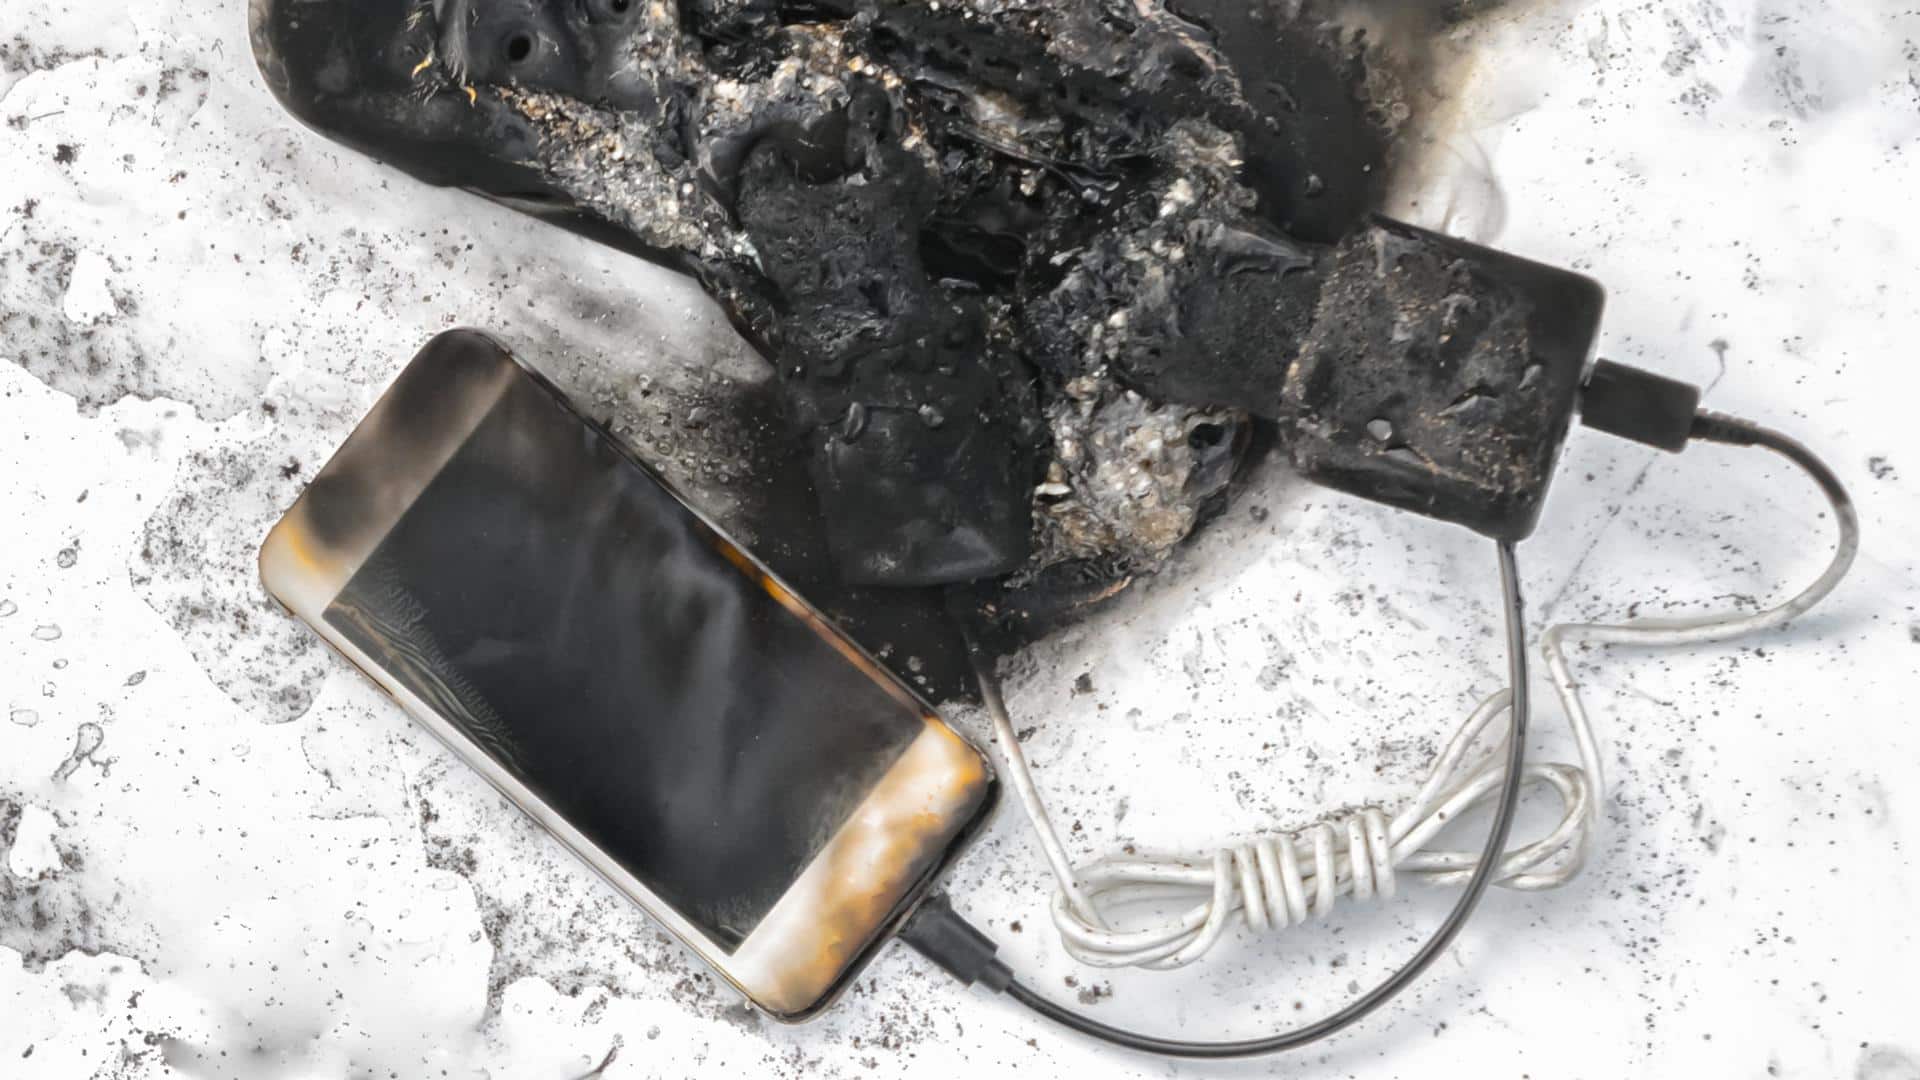 Smartphone explosions: Why phones explode, and how to prevent them 